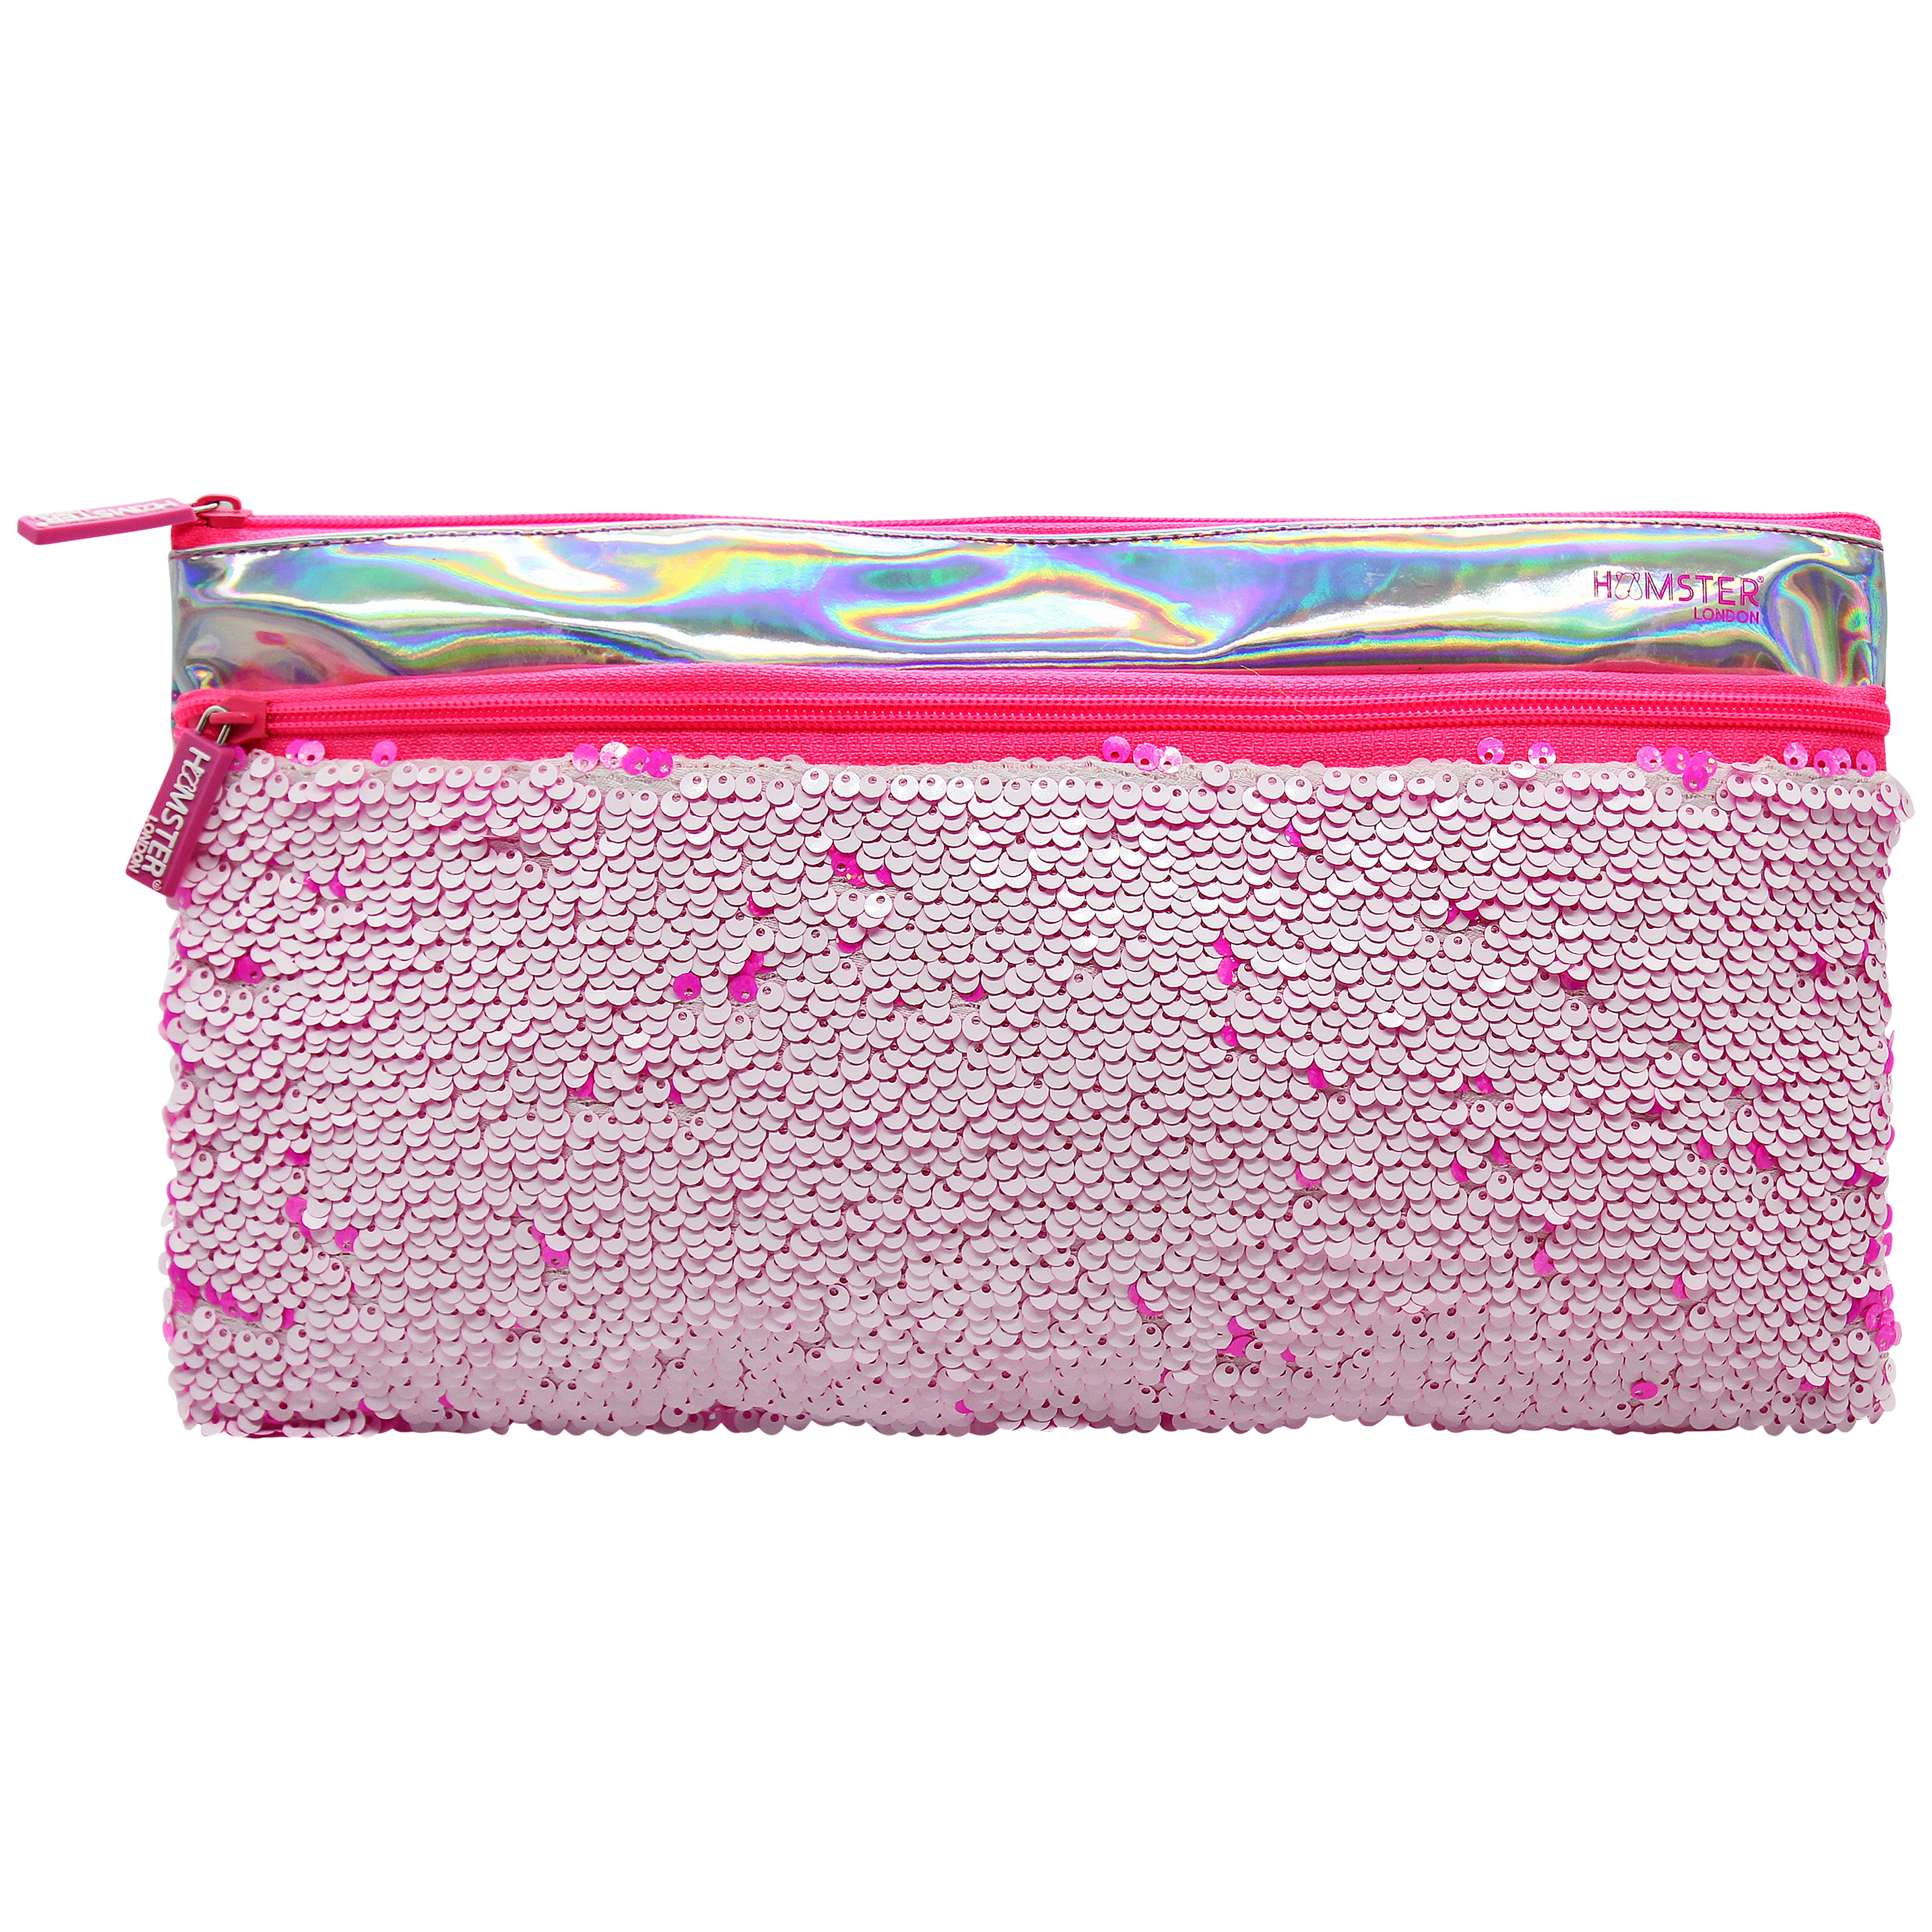 Sequence makeup Pouch Lama